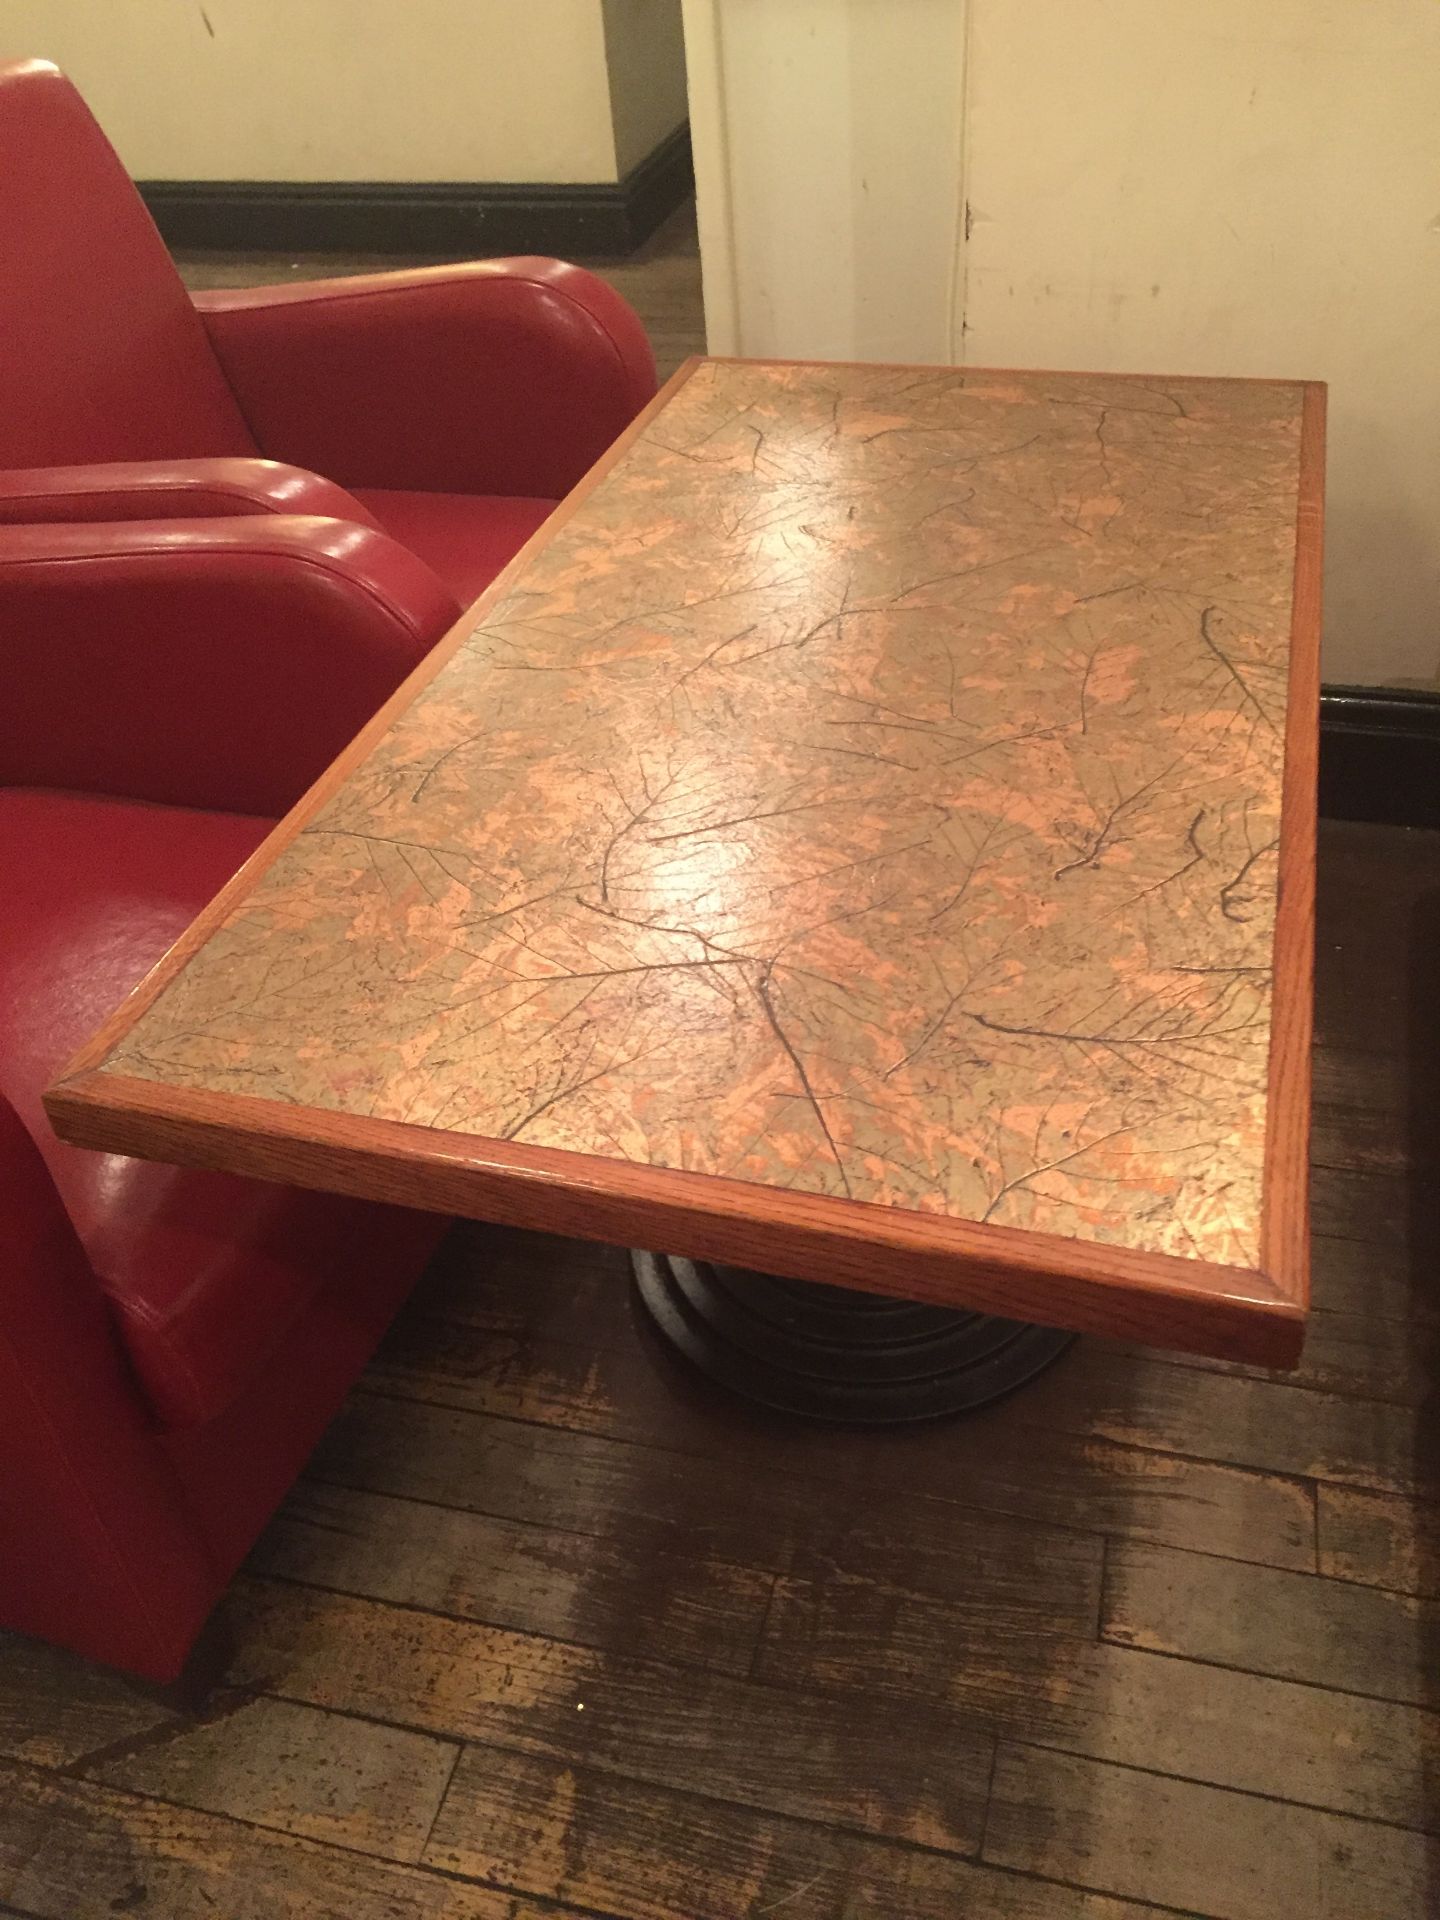 1 x Rectangular Table With Inlayed Top, With A Sturdy Metal Base - Dimensions: W110 x D60 x